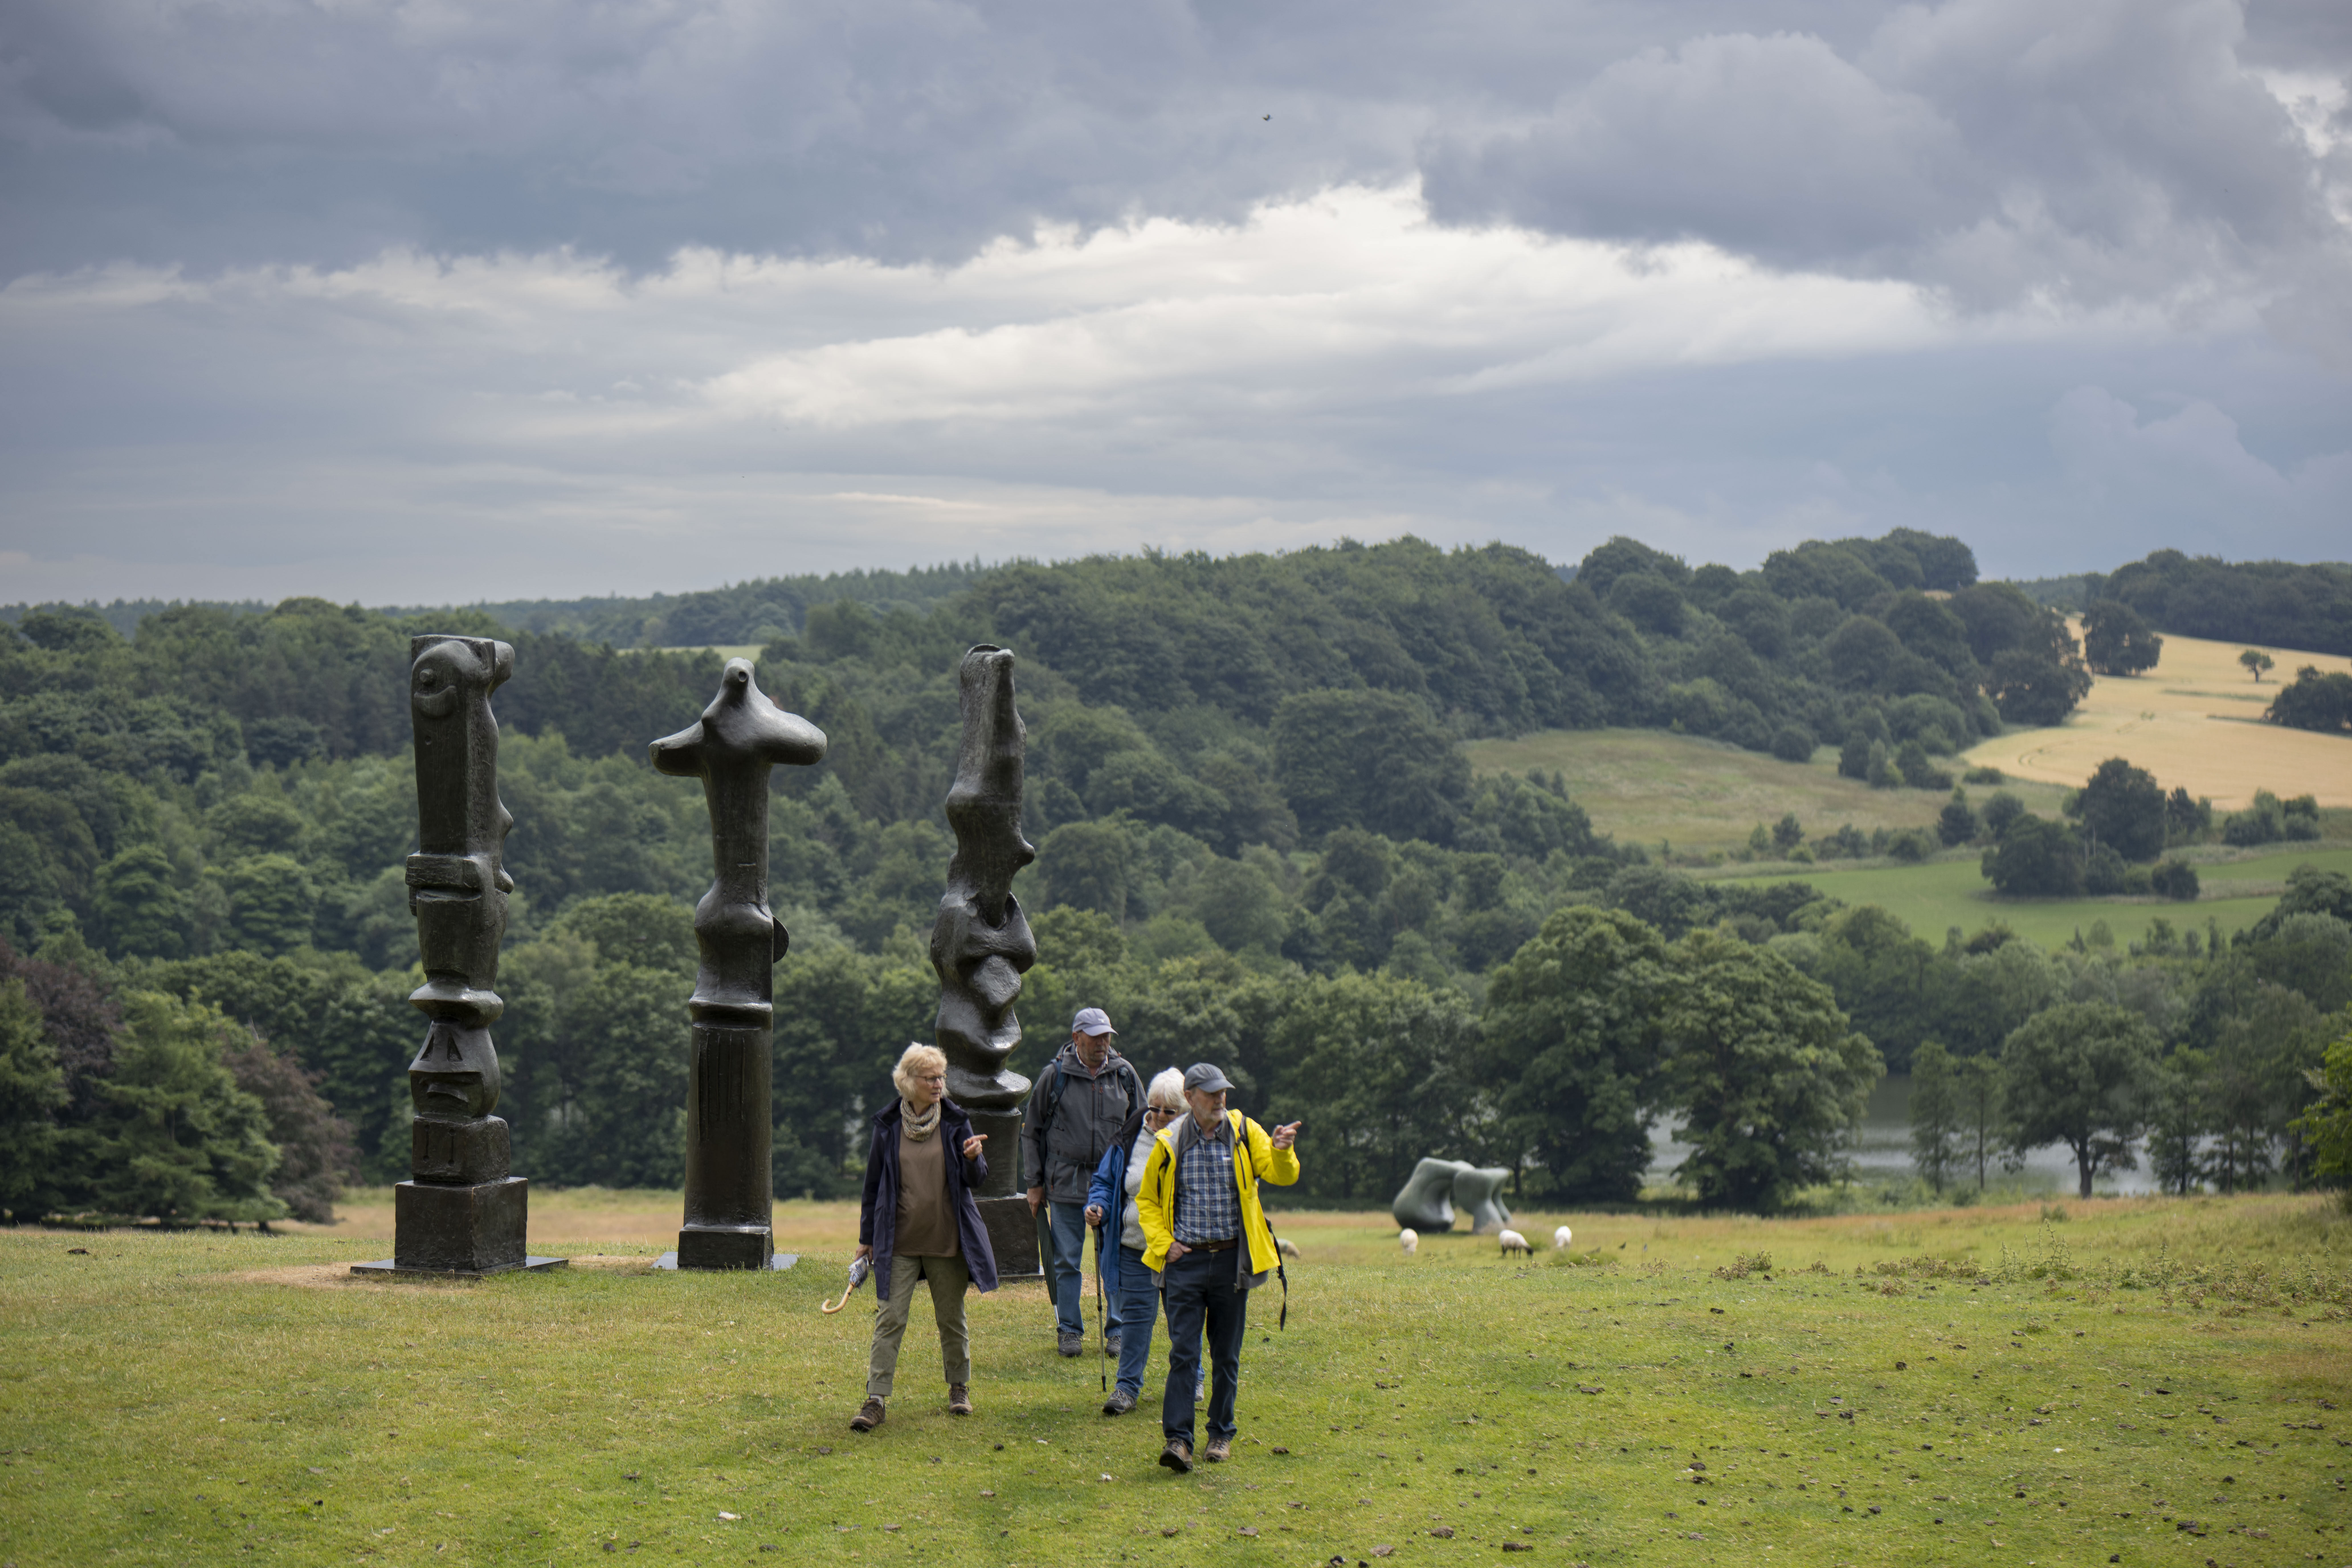 People in raincoats walking past three tall thin bronze sculptures looking out over the landscape